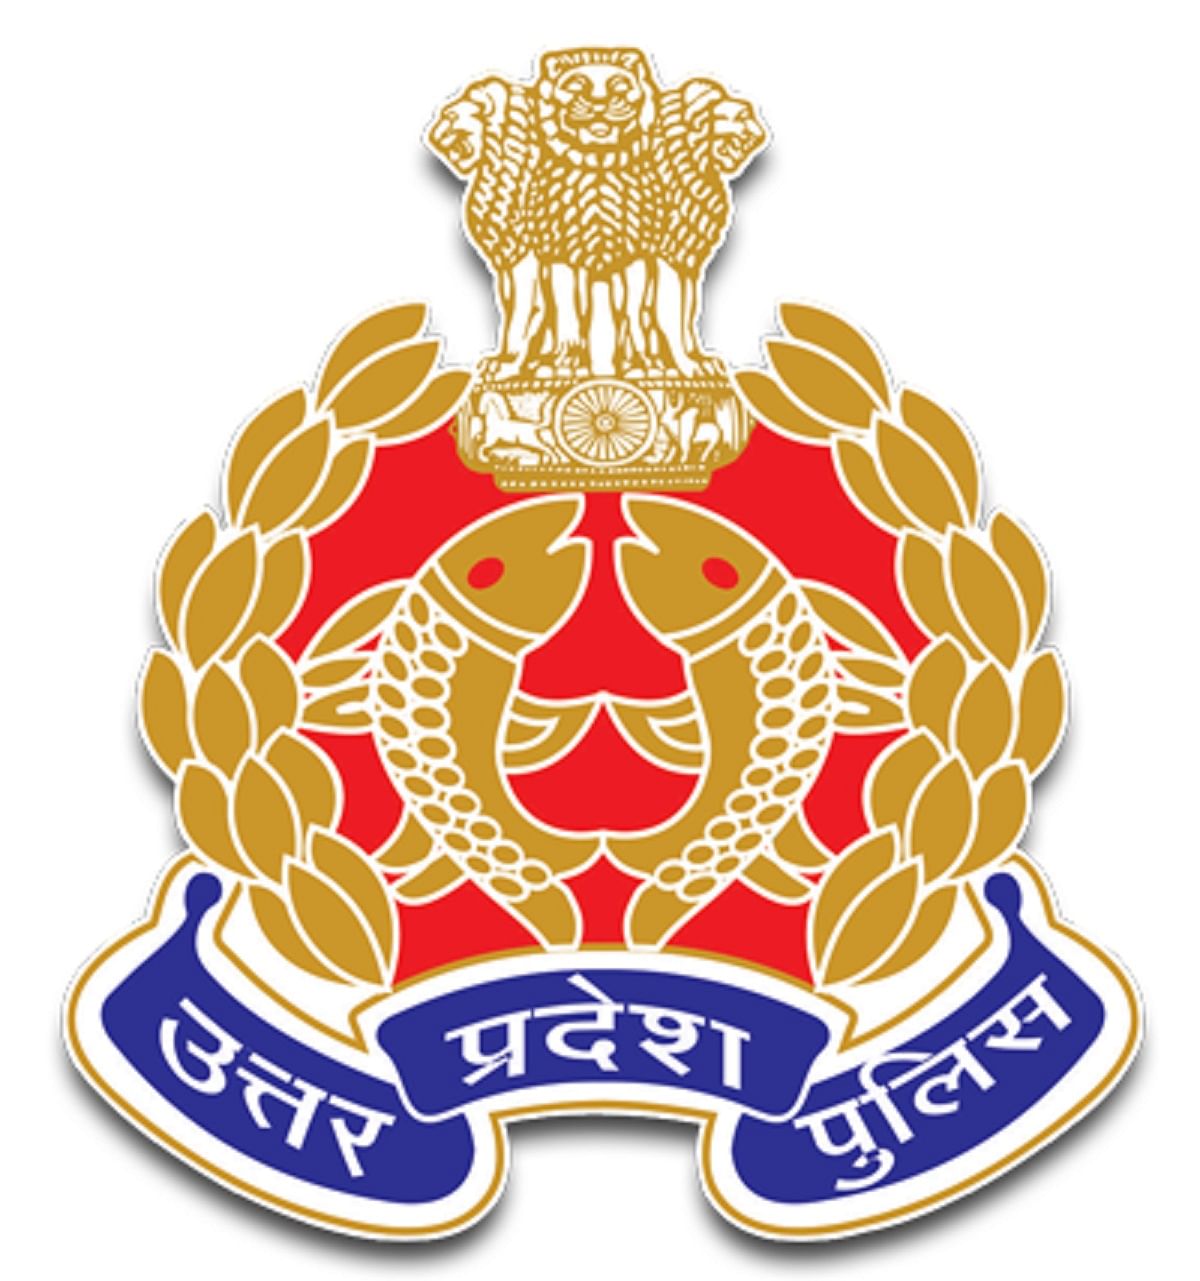 UP Police Recruitment 2021: Registrations for 9534 Sub Inspector & Other Posts Ends Tomorrow, Apply Now